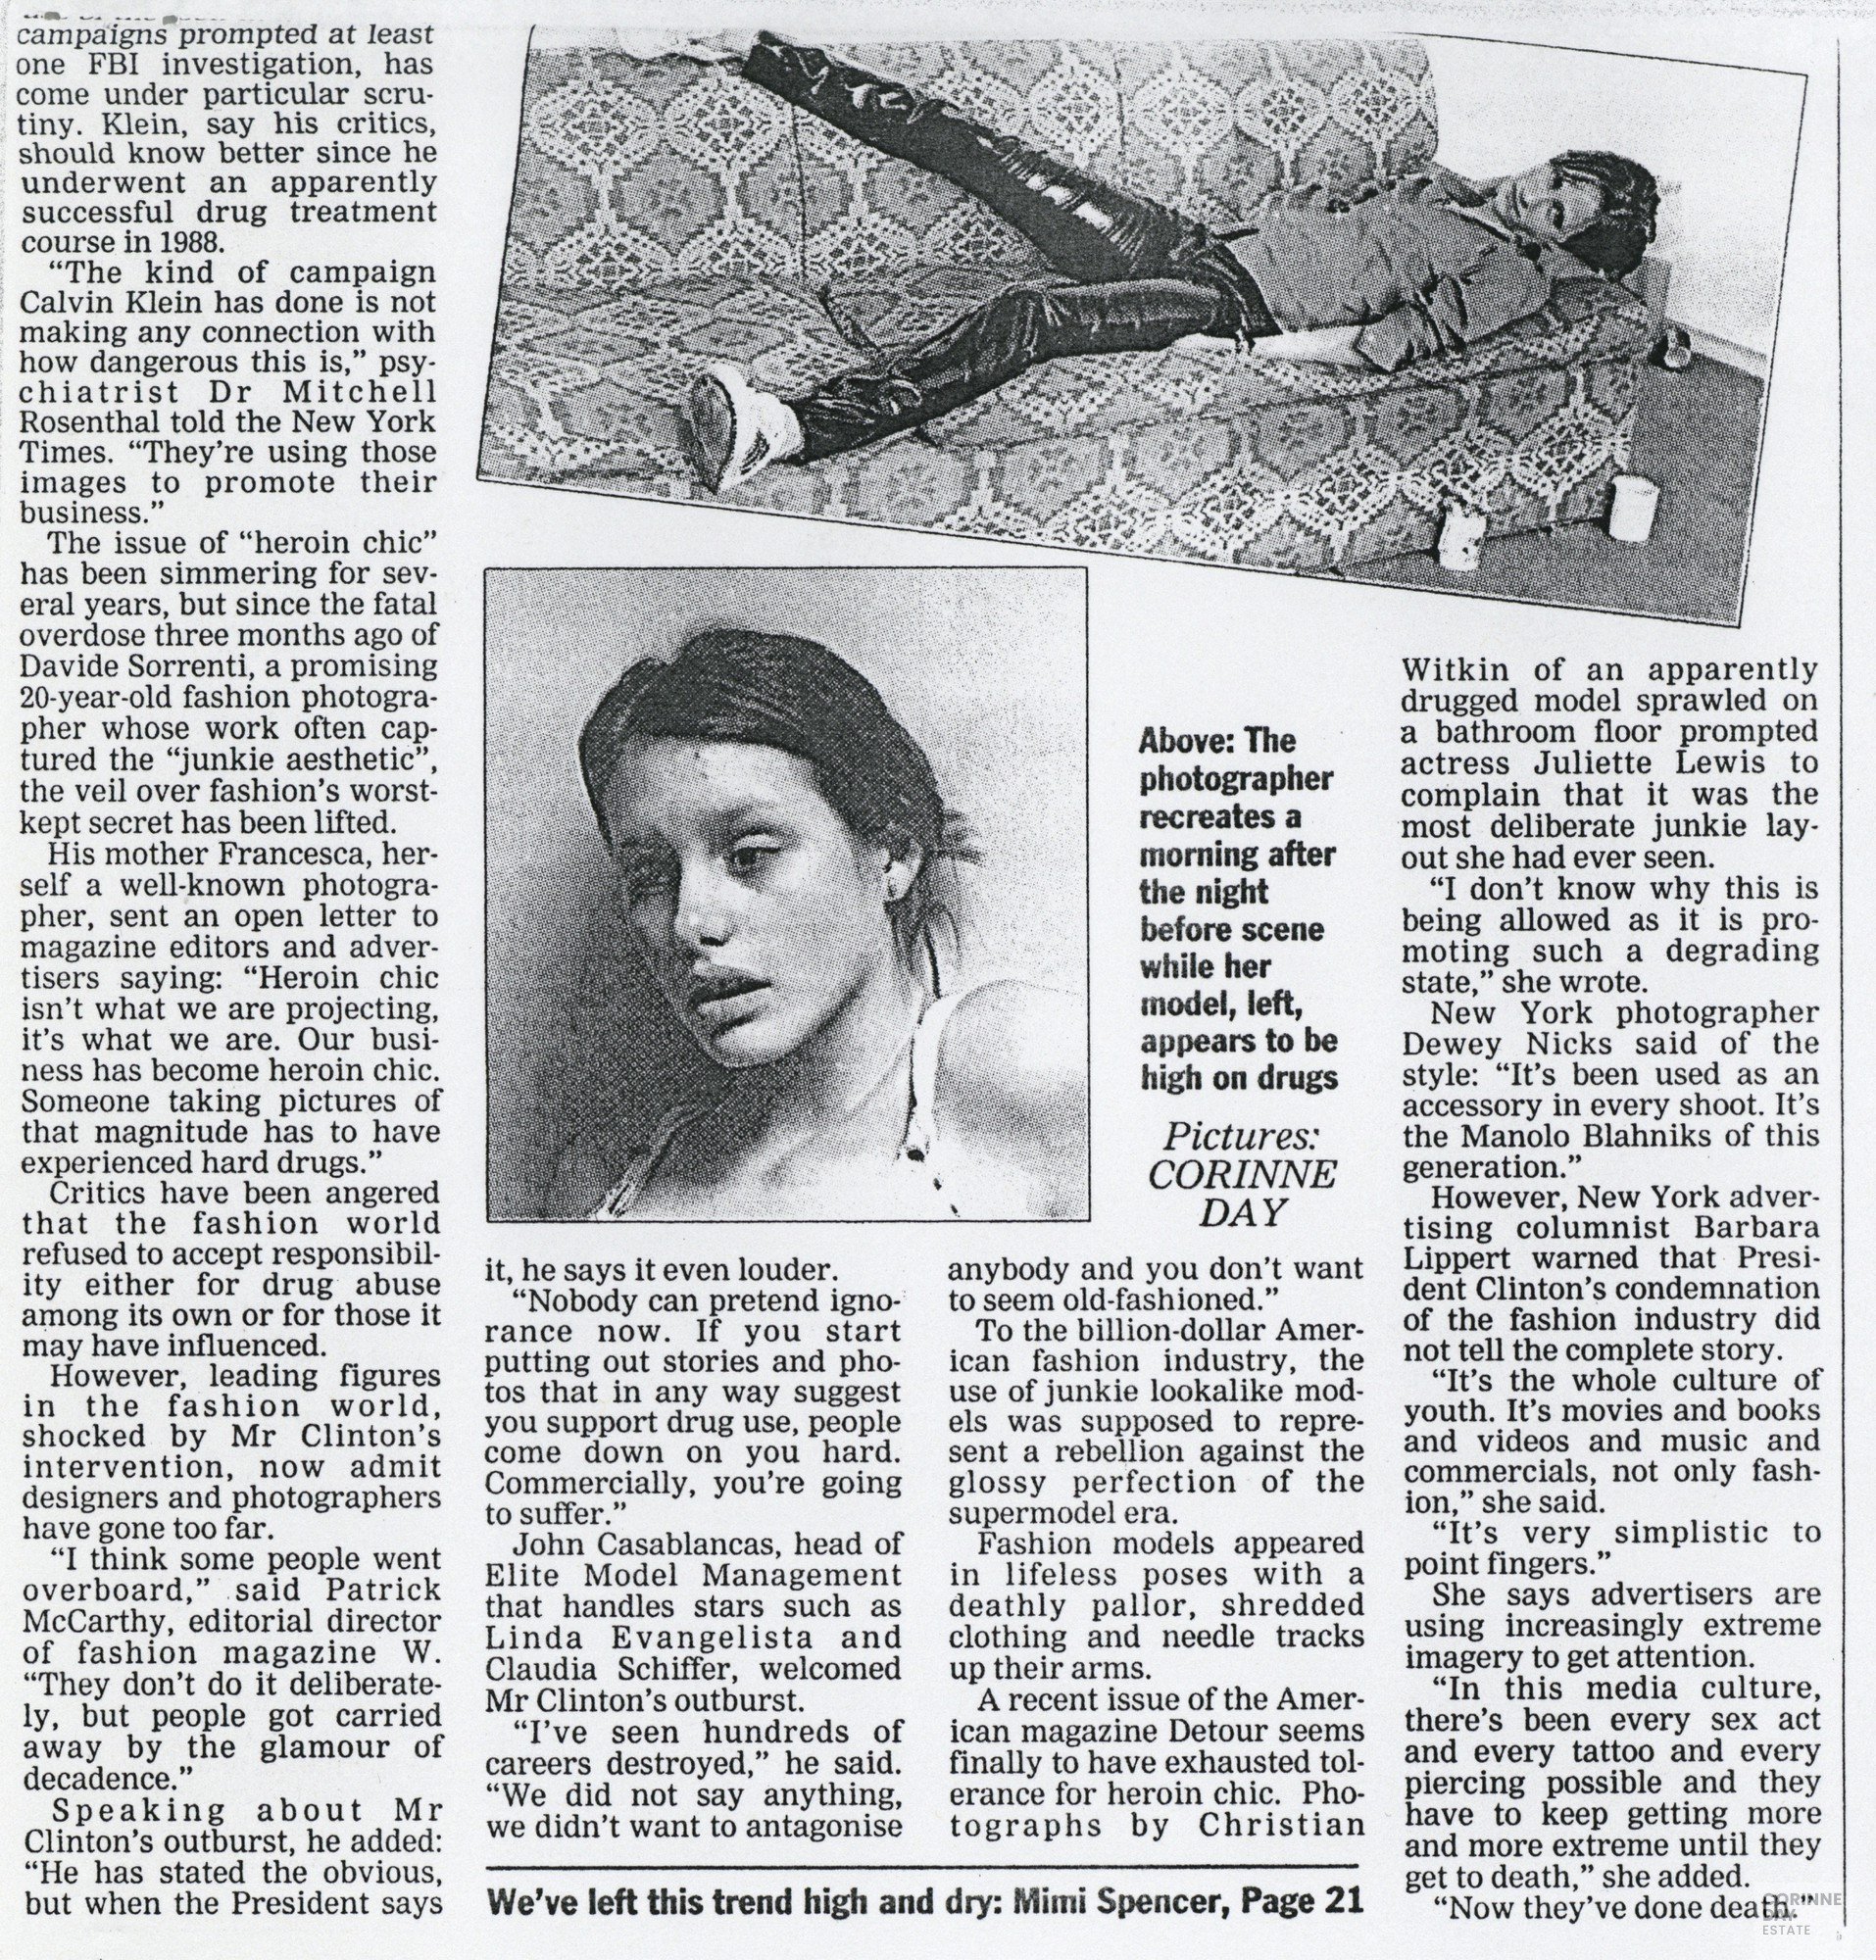 Clinton rages at fashion industry over sick taste for 'heroin chic', Evening Standard, 22 May 1997 — Image 2 of 2